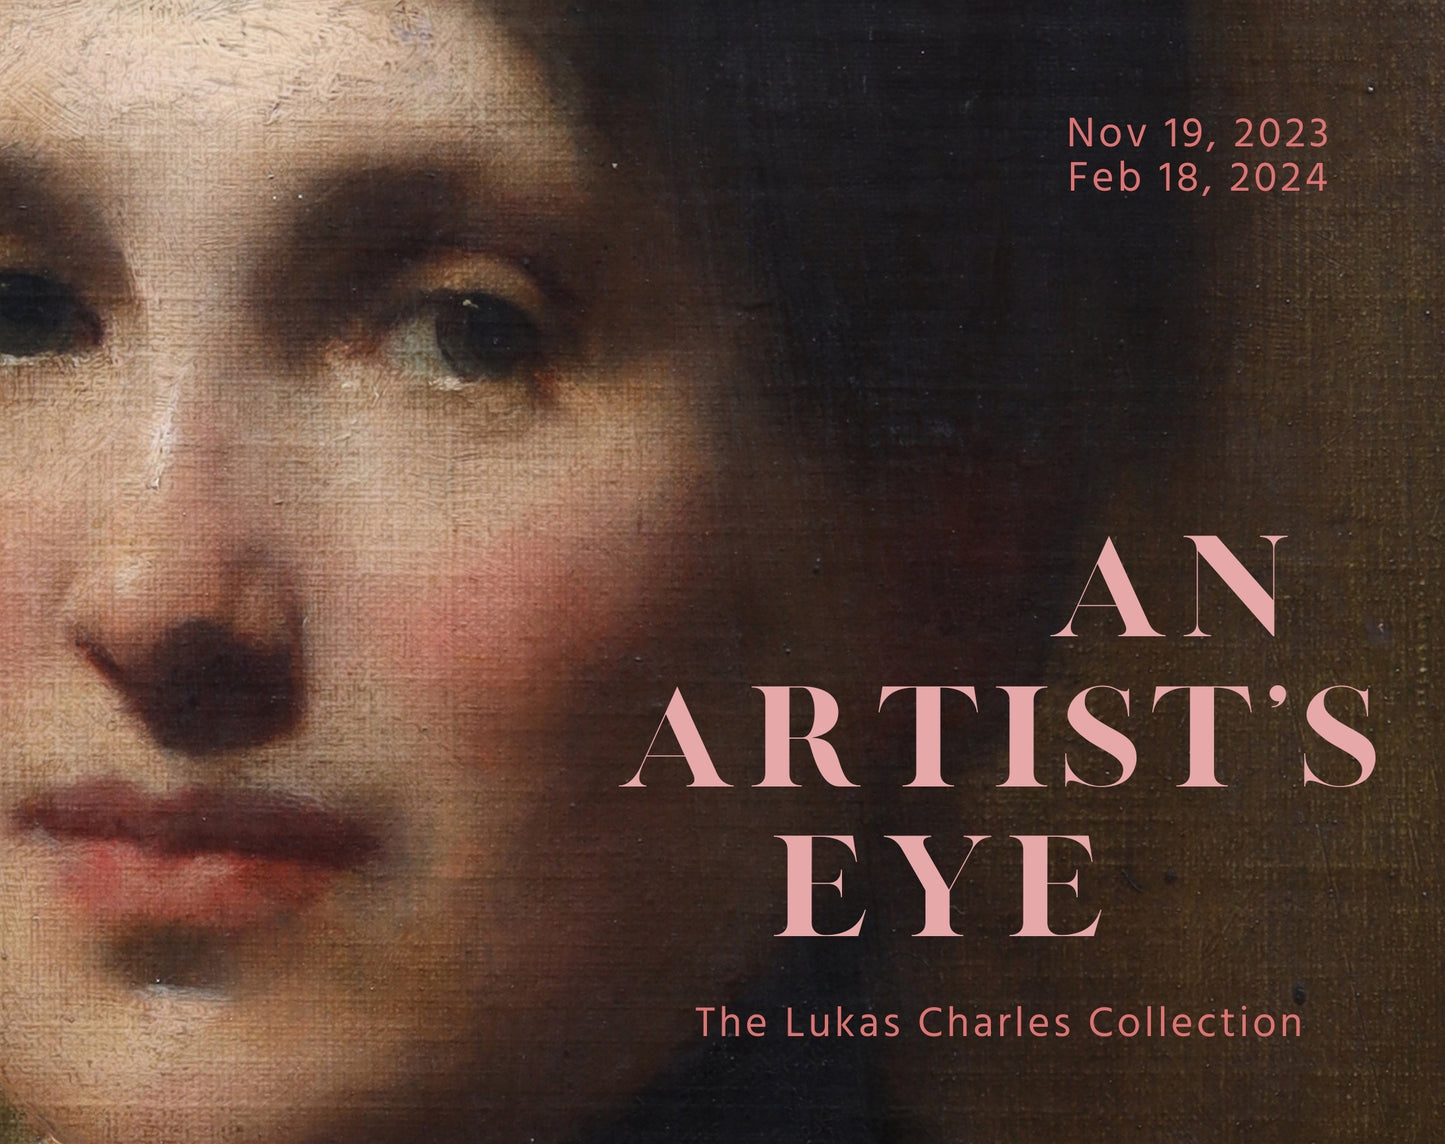 Preview Event - An Artist’s Eye: The Lukas Charles Collection Exhibit